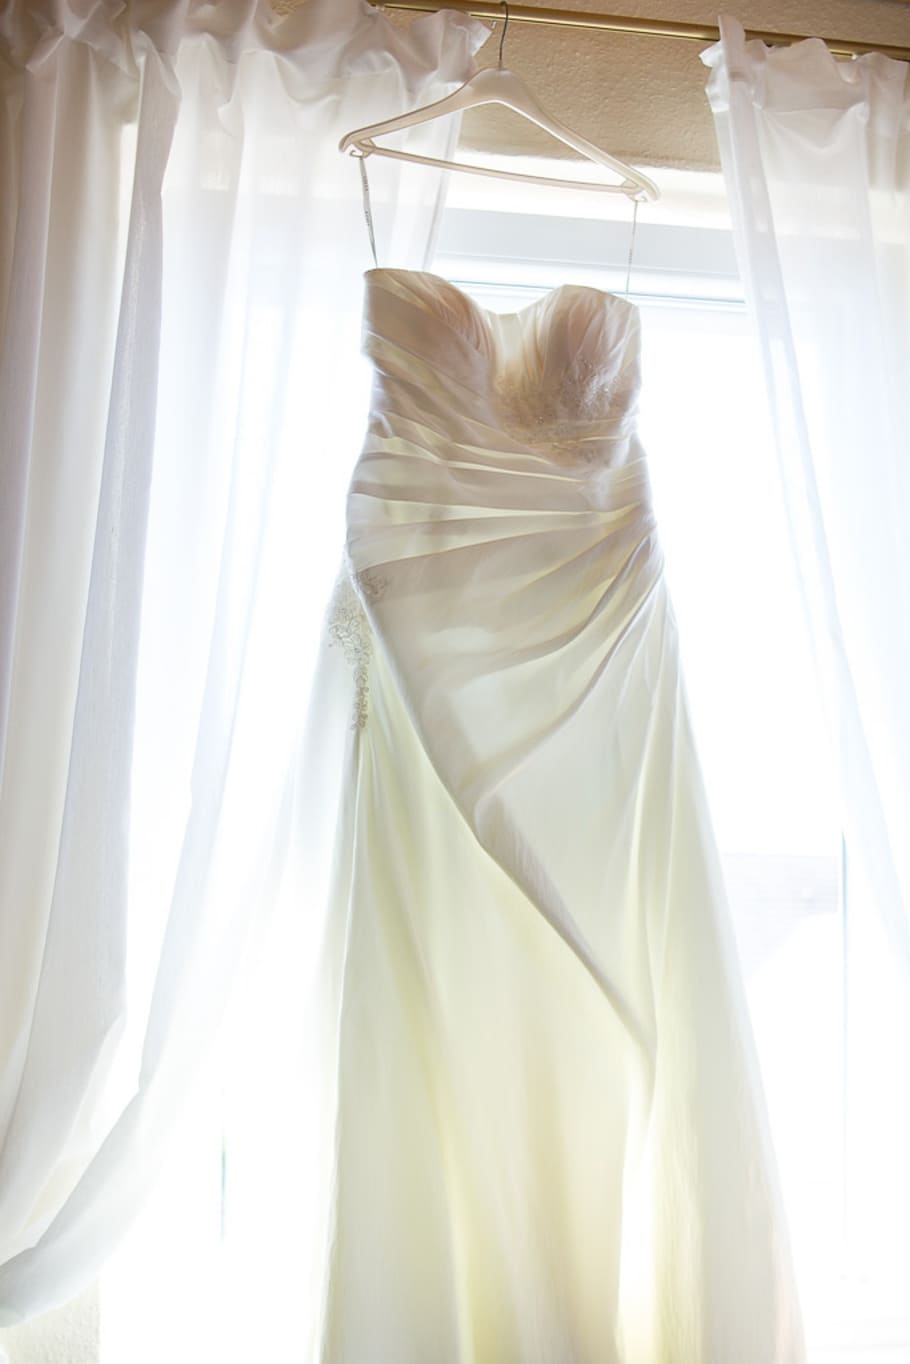 white, drape tube wedding gown, hang, clothes hanger, window curtains, wedding, dress, curtain, marriage, window